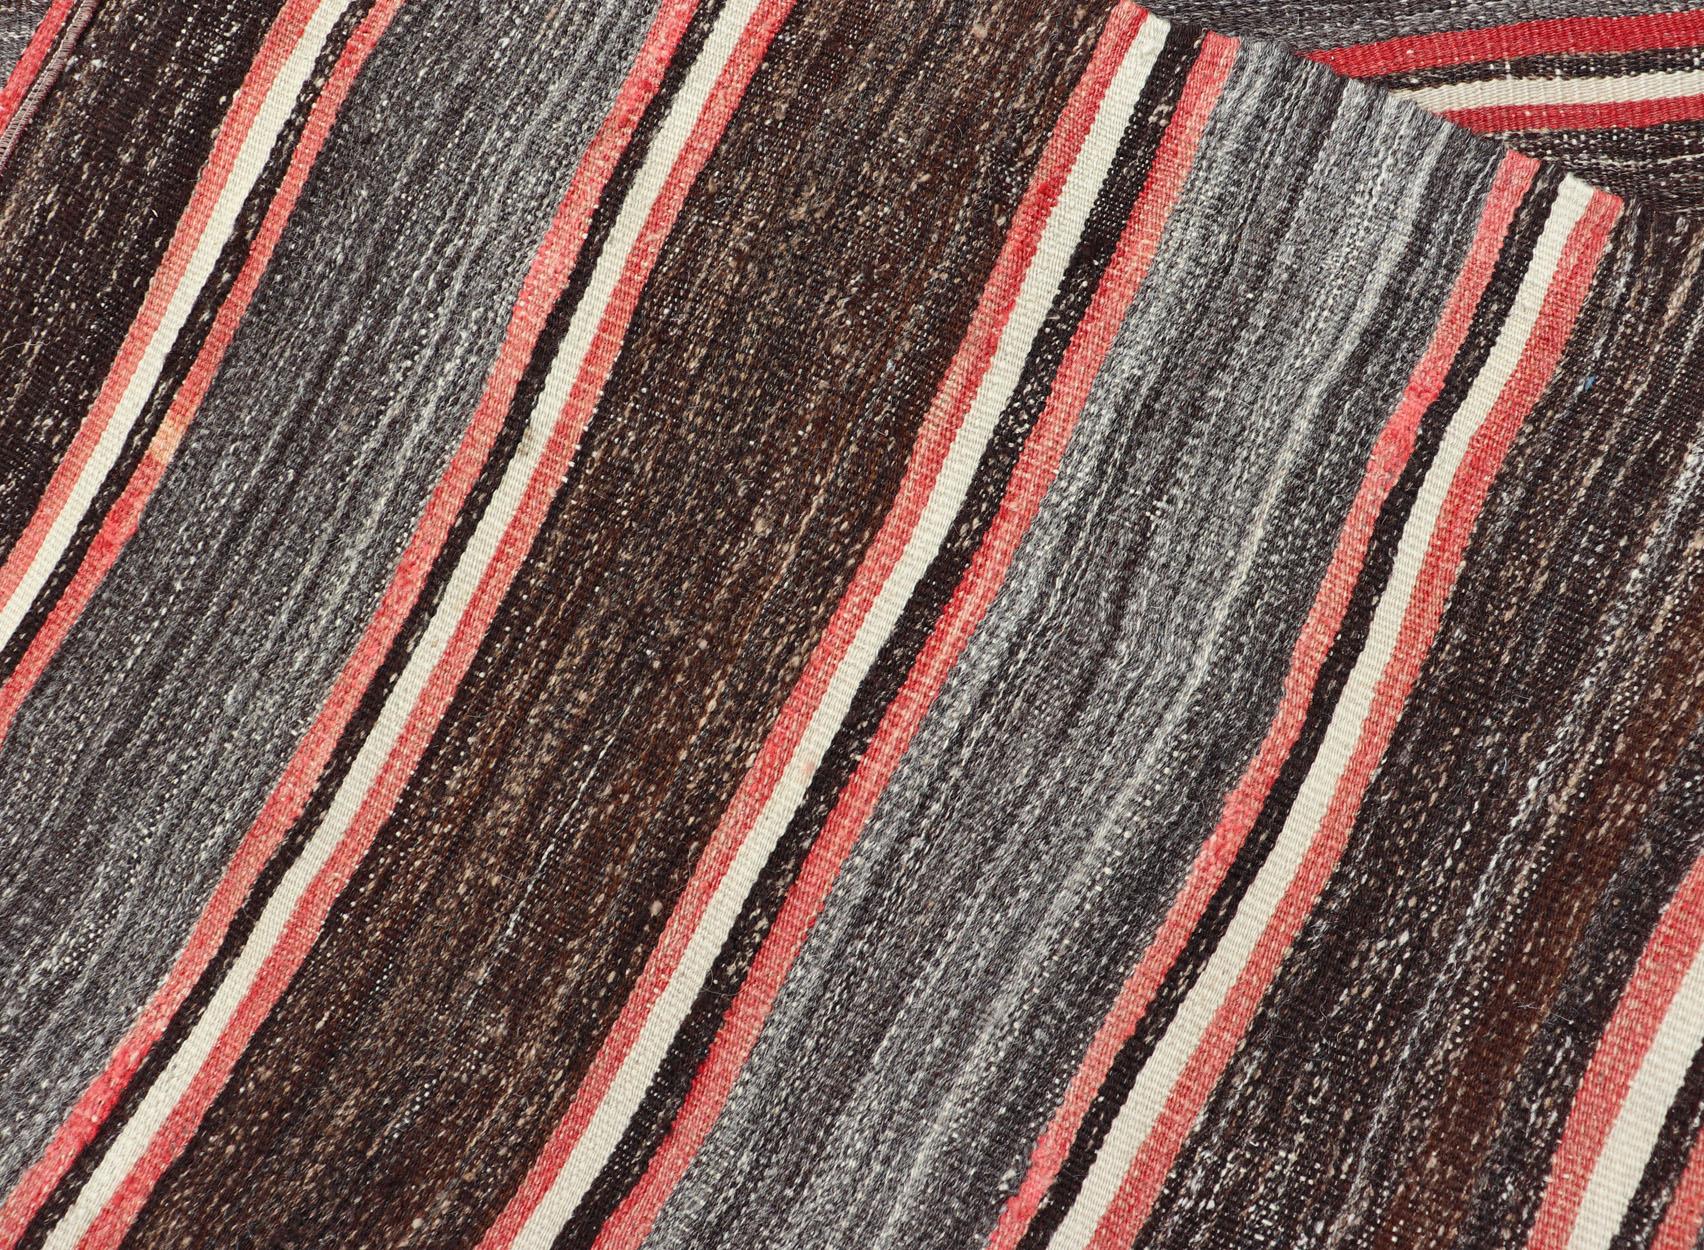 Wool Vintage Turkish Kilim Wide Runner in Gray, Coral, Brown & Charcoal with Stripes